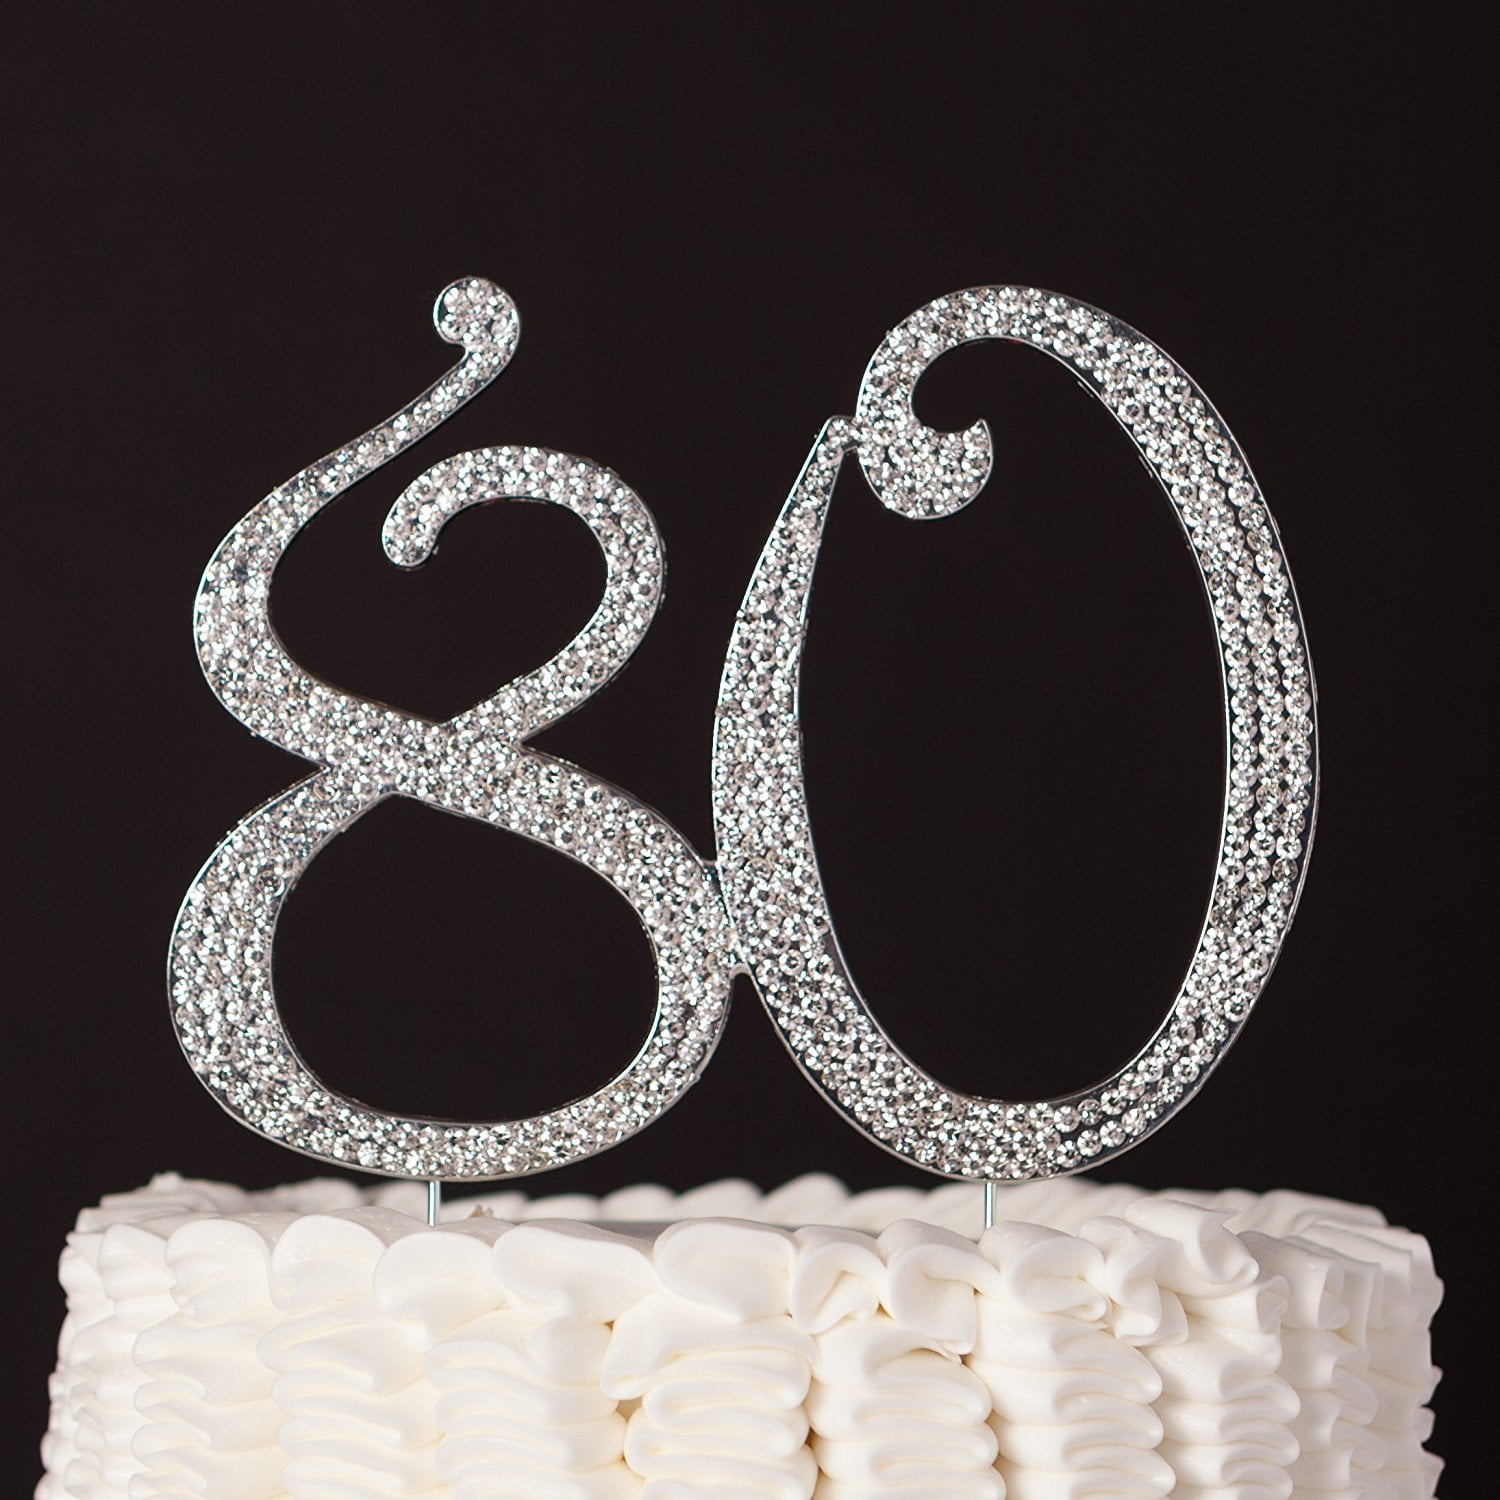 80 Cake Topper For 80th Birthday Anniversary Party Supplies